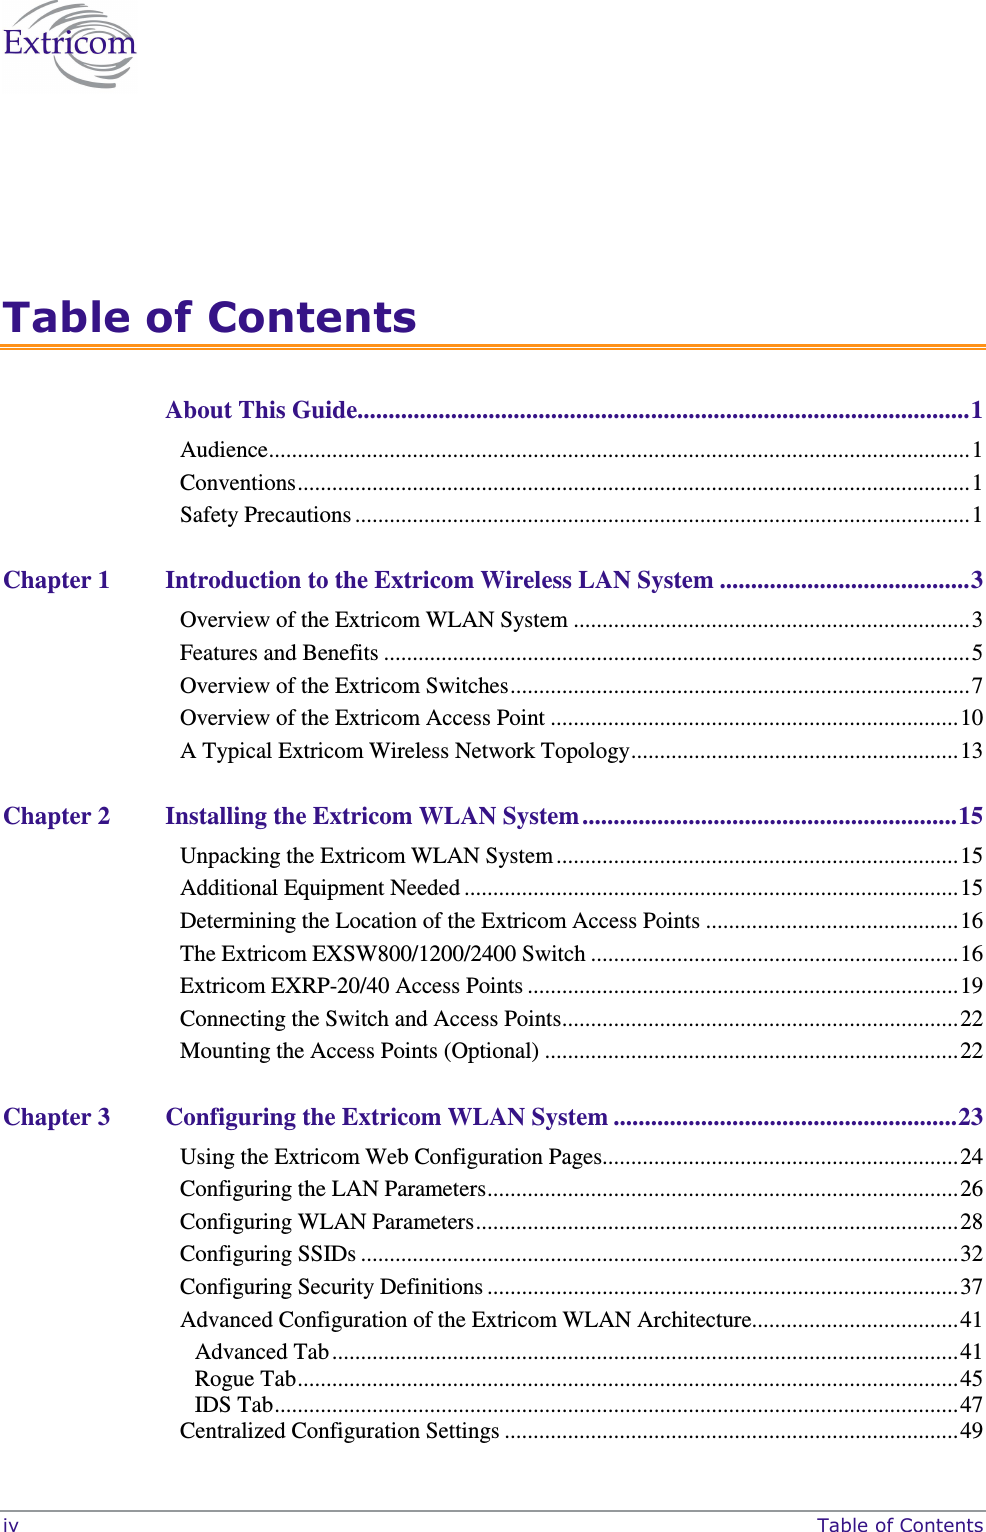  iv     Table of Contents  Table of Contents About This Guide..................................................................................................1 Audience..........................................................................................................................1 Conventions.....................................................................................................................1 Safety Precautions ...........................................................................................................1 Chapter 1 Introduction to the Extricom Wireless LAN System ........................................3 Overview of the Extricom WLAN System .....................................................................3 Features and Benefits ......................................................................................................5 Overview of the Extricom Switches................................................................................7 Overview of the Extricom Access Point .......................................................................10 A Typical Extricom Wireless Network Topology.........................................................13 Chapter 2 Installing the Extricom WLAN System ............................................................15 Unpacking the Extricom WLAN System ......................................................................15 Additional Equipment Needed ......................................................................................15 Determining the Location of the Extricom Access Points ............................................16 The Extricom EXSW800/1200/2400 Switch ................................................................16 Extricom EXRP-20/40 Access Points ...........................................................................19 Connecting the Switch and Access Points.....................................................................22 Mounting the Access Points (Optional) ........................................................................22 Chapter 3 Configuring the Extricom WLAN System .......................................................23 Using the Extricom Web Configuration Pages..............................................................24 Configuring the LAN Parameters..................................................................................26 Configuring WLAN Parameters....................................................................................28 Configuring SSIDs ........................................................................................................32 Configuring Security Definitions ..................................................................................37 Advanced Configuration of the Extricom WLAN Architecture....................................41 Advanced Tab.............................................................................................................41 Rogue Tab...................................................................................................................45 IDS Tab.......................................................................................................................47 Centralized Configuration Settings ...............................................................................49 